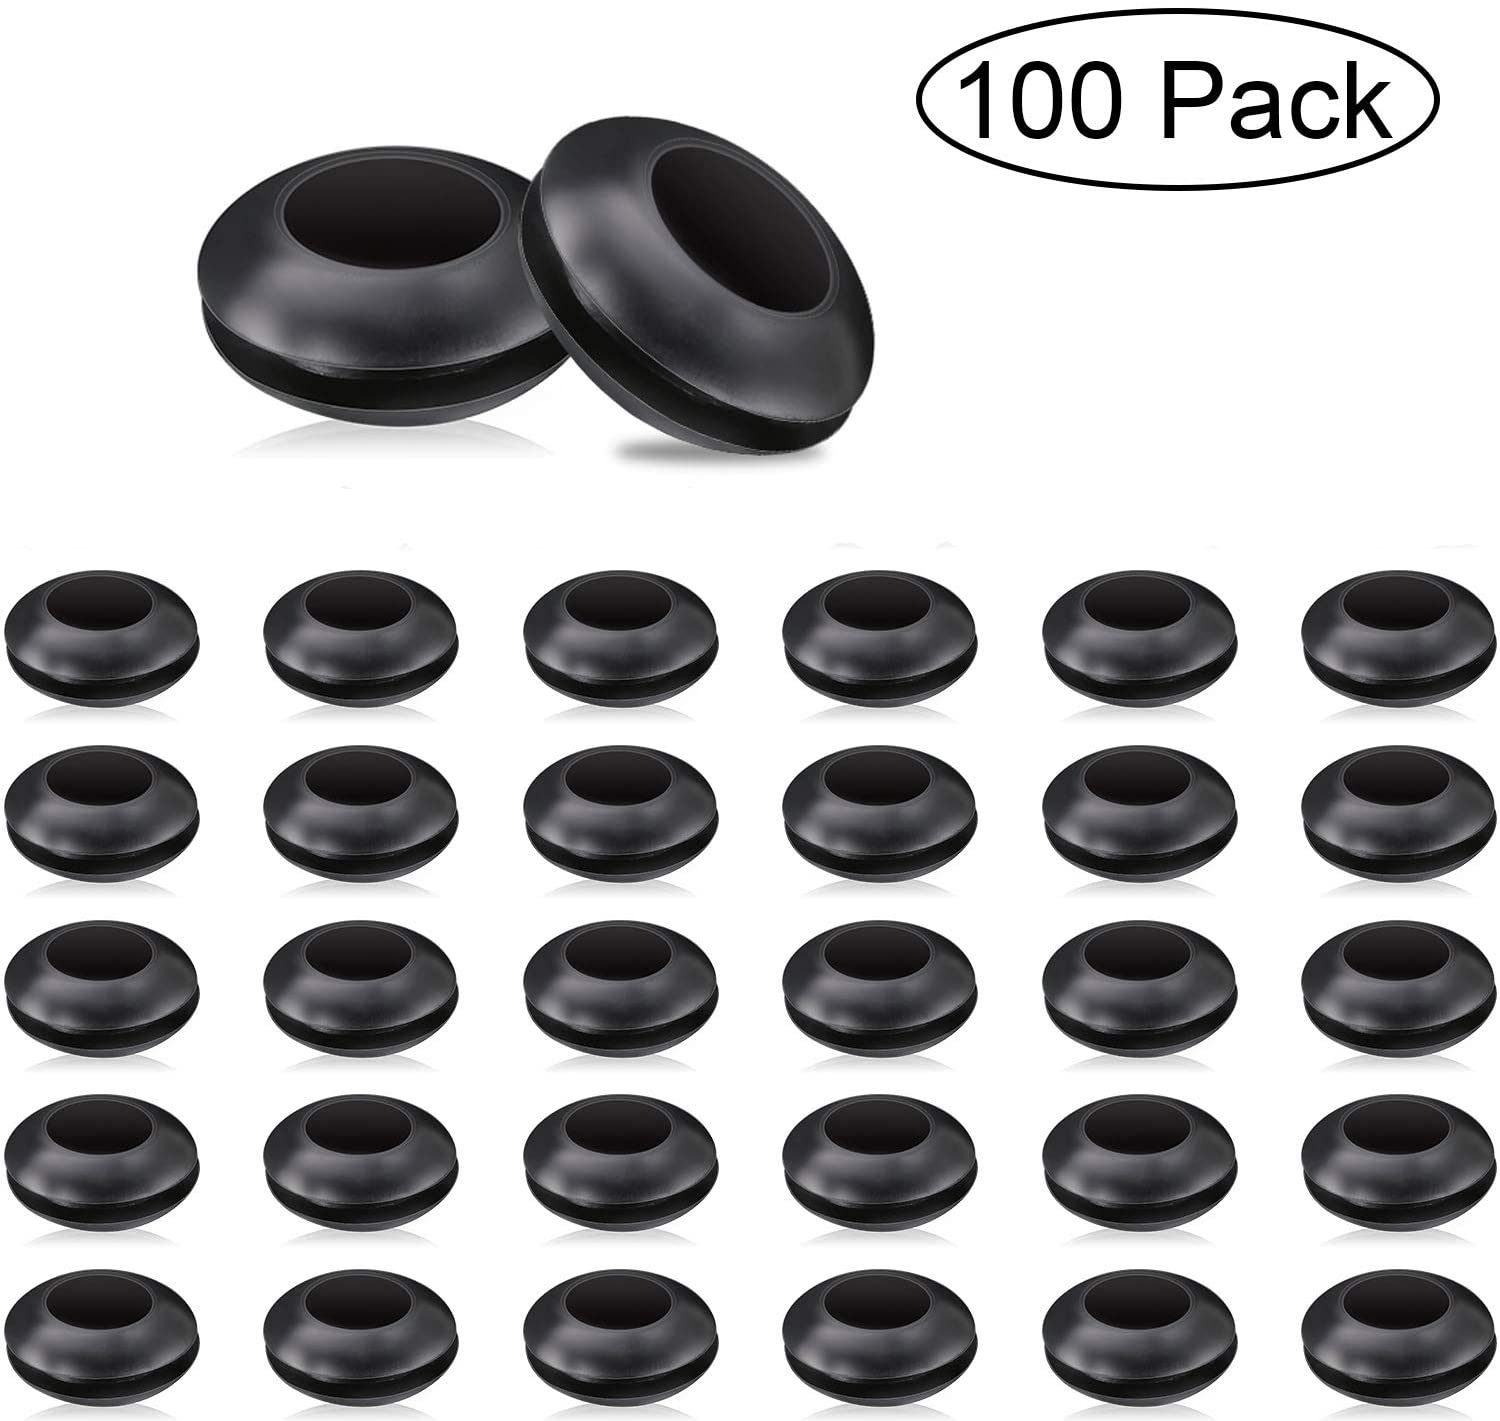 Airlock Grommet, Fermenter Lid Grommet Silicone Grommets for Homebrewing, Straws, Airlock, Beer, Mead, Wine, Silicone Bucket Fermenter Lids, 5/8 Inch OD and 3/8 Inch ID (100)